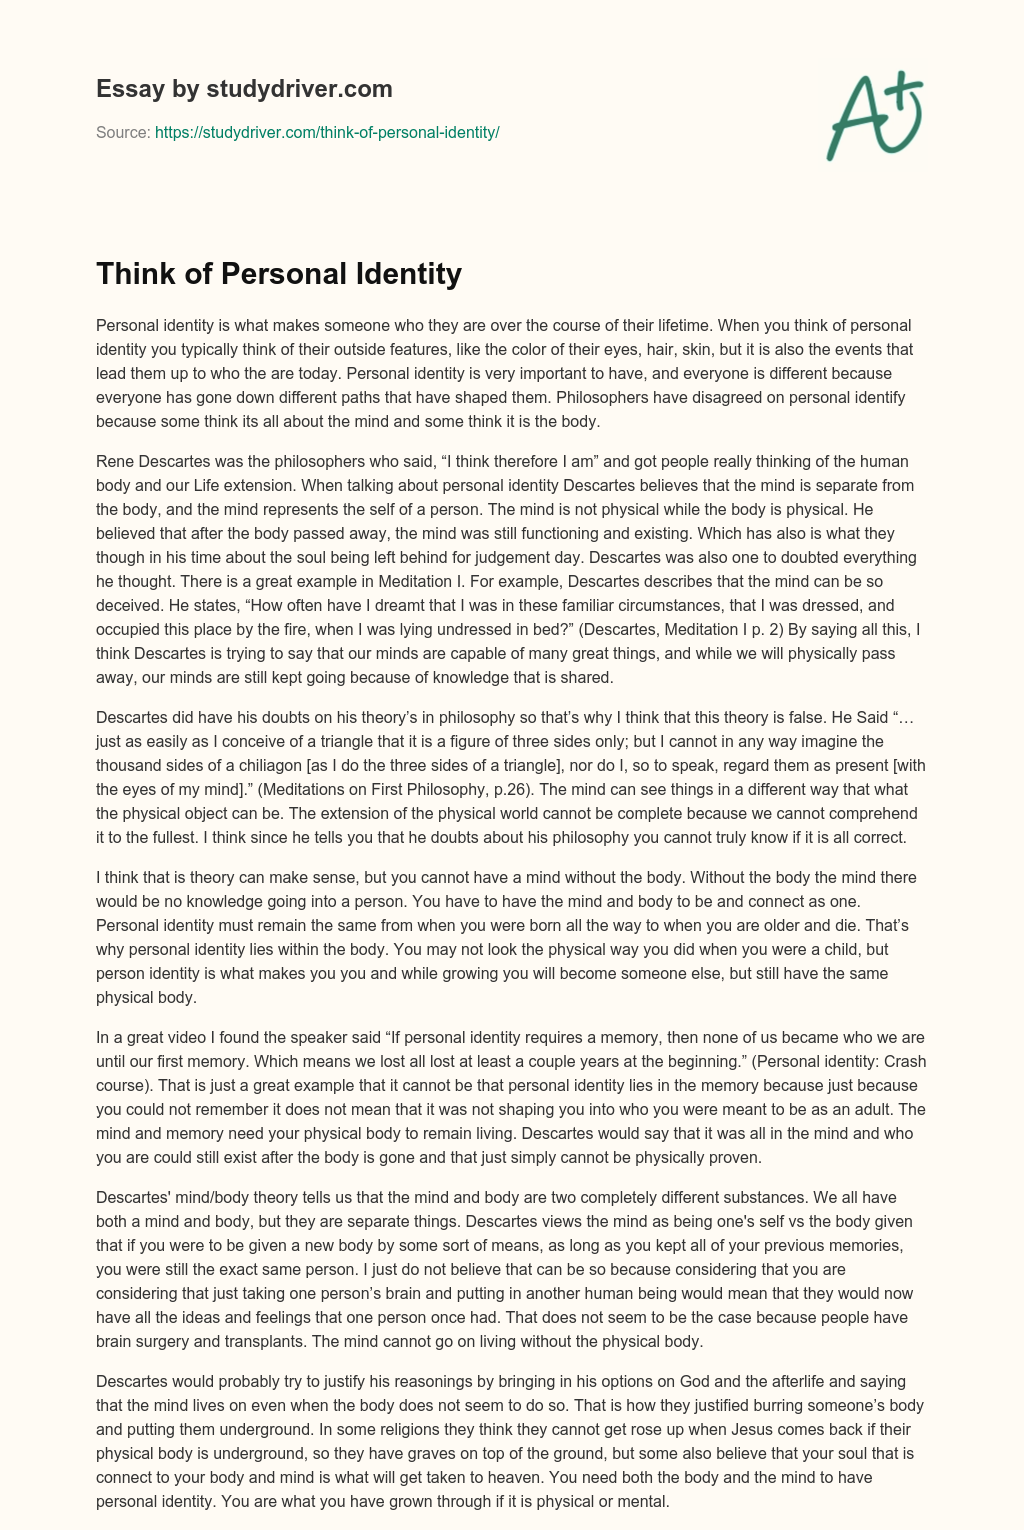 Think of Personal Identity essay